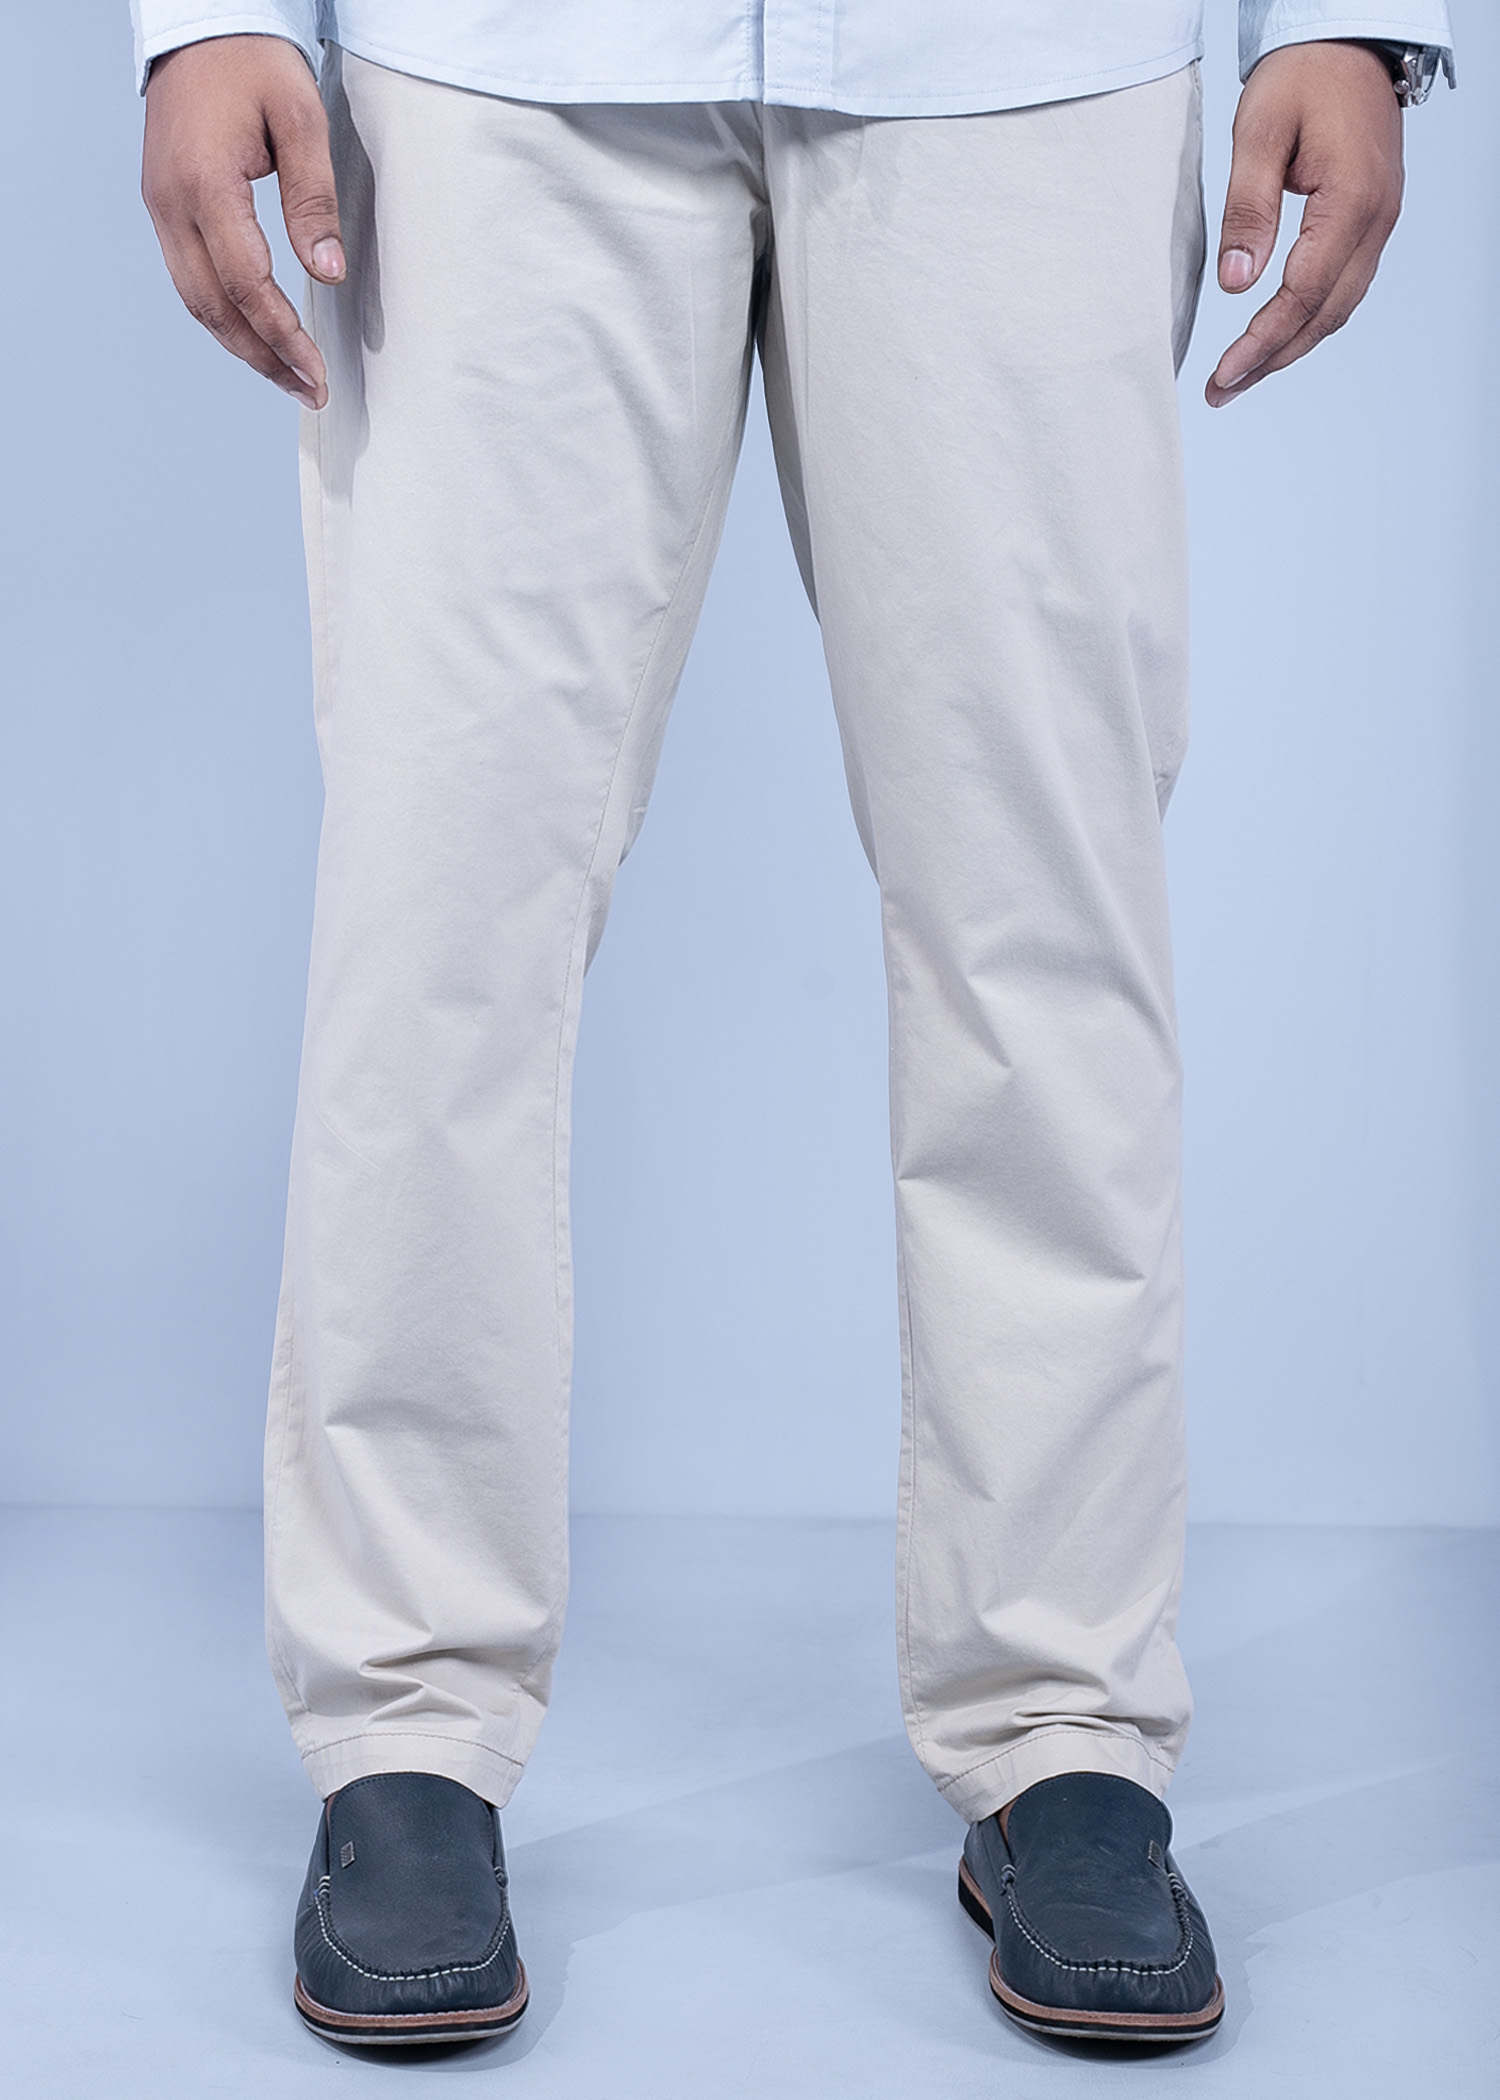 silvan chino pant beige color half front view